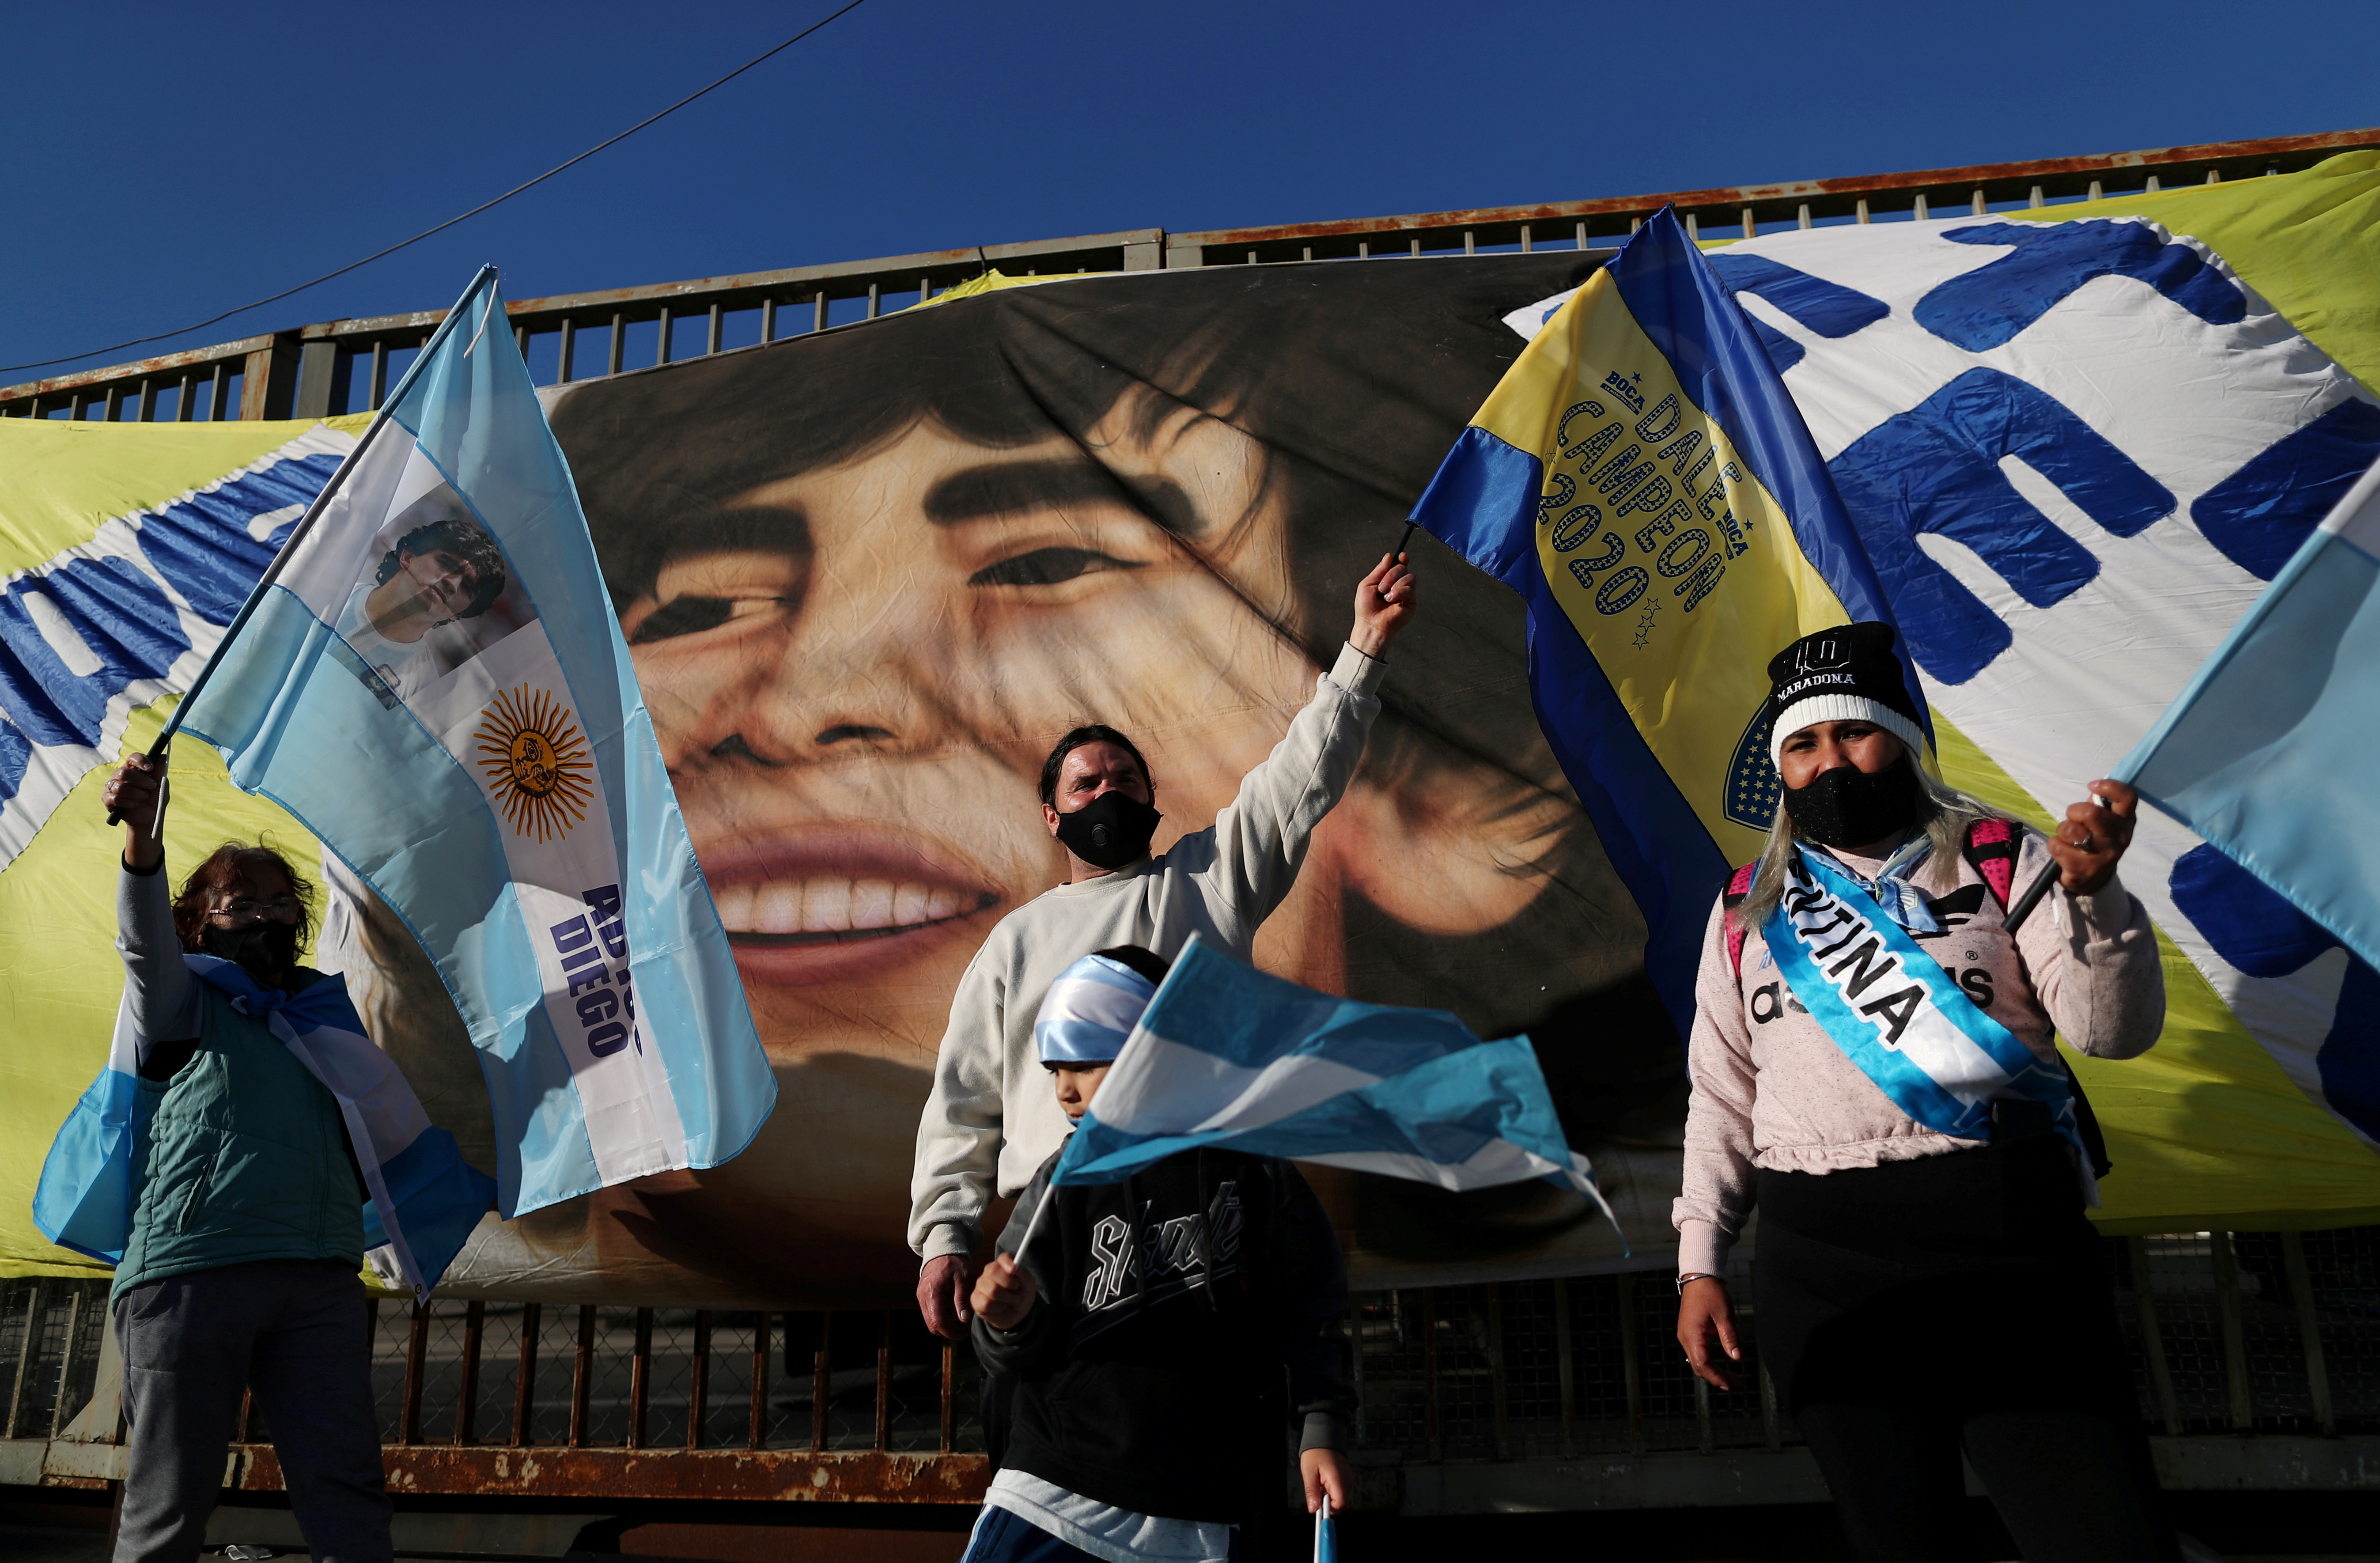 Diego Maradona death anniversary: Fans celebrate the glorious career of the Argentine football legend